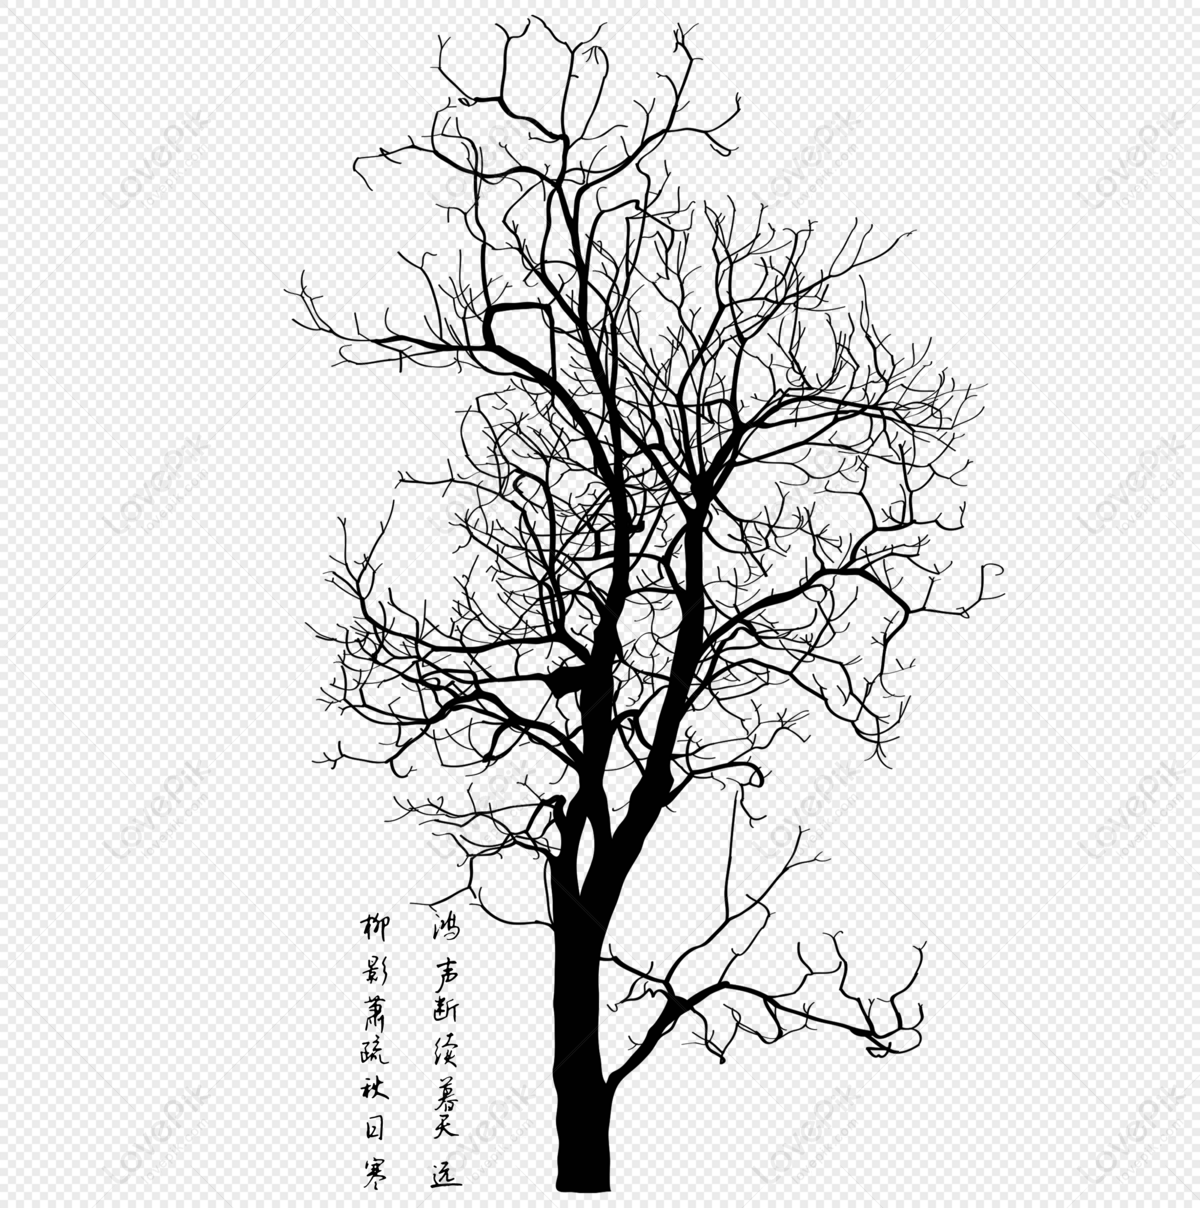 Dry Trees Images, HD Pictures For Free Vectors Download - Lovepik.com